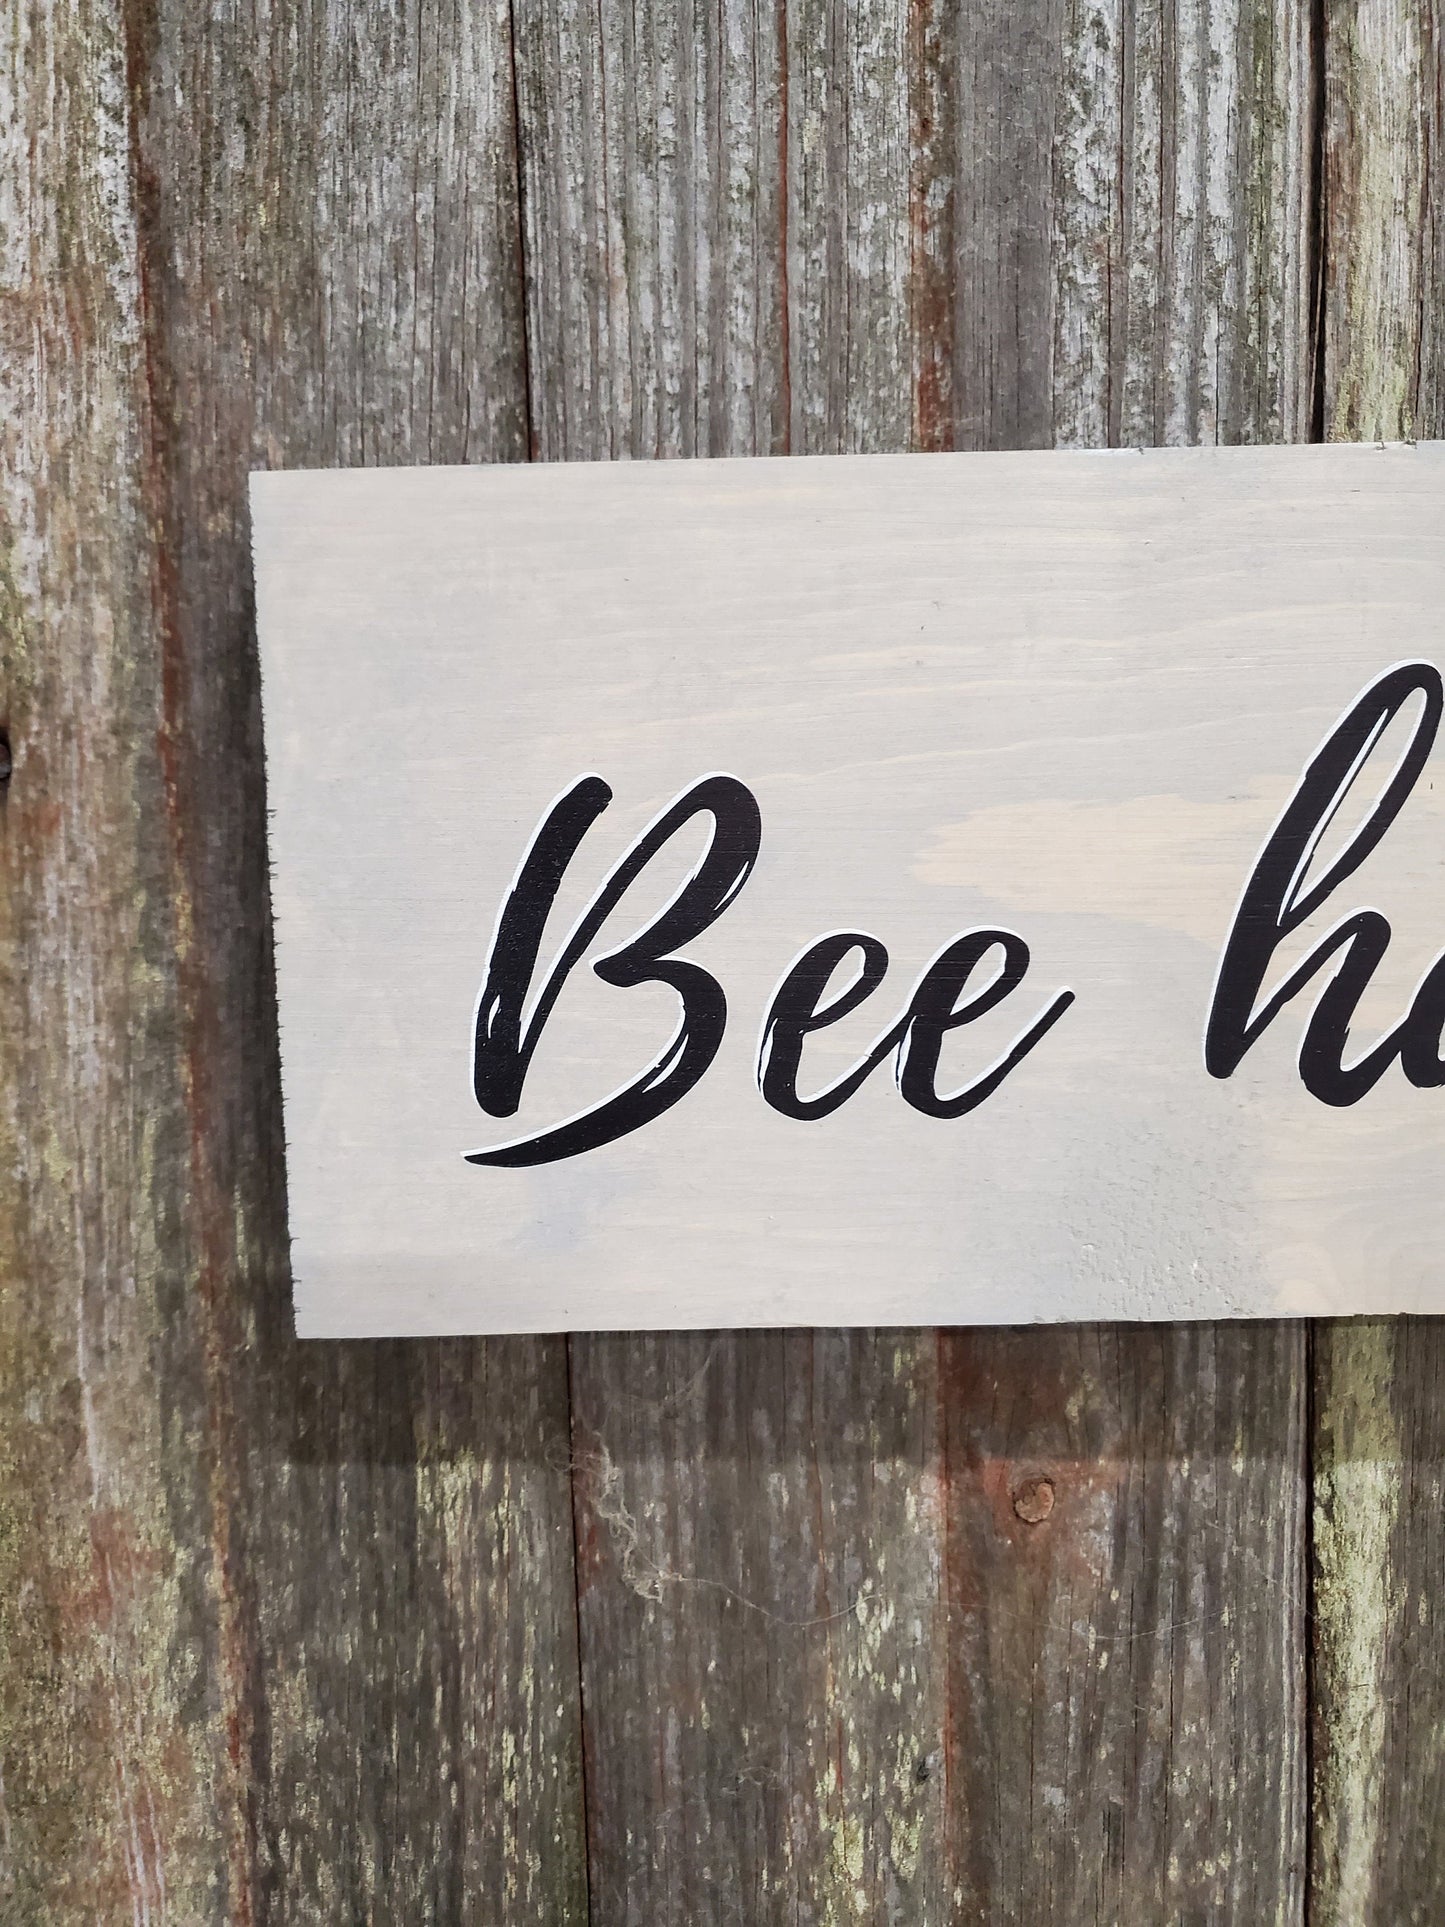 Bee Happy Fun Bumble Bee Buzz Buzz Wall Art Spring Decor Honey Bee Wall Wood Print Color Office Gift